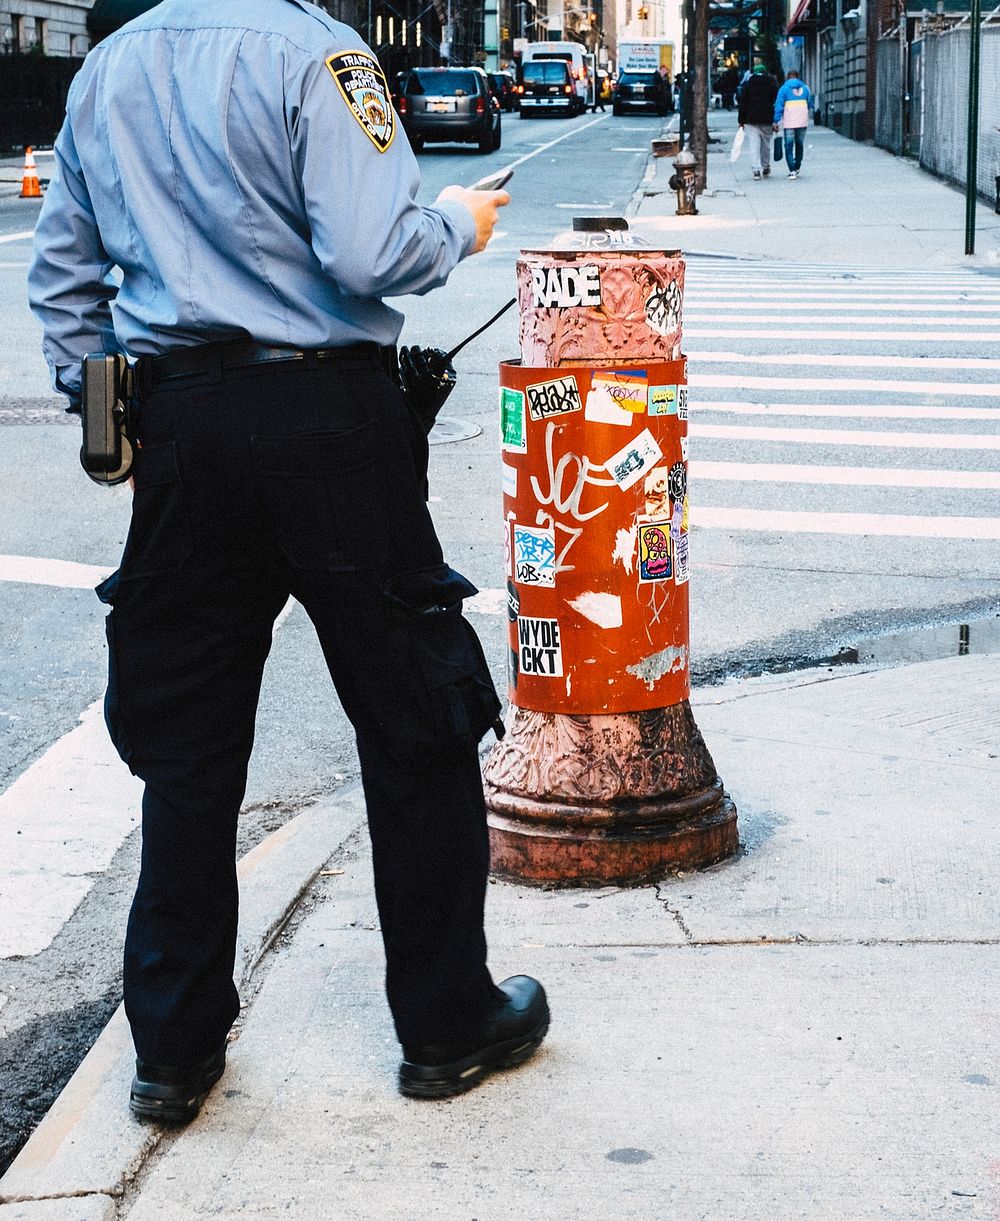 Police officer at work in New York City, United States